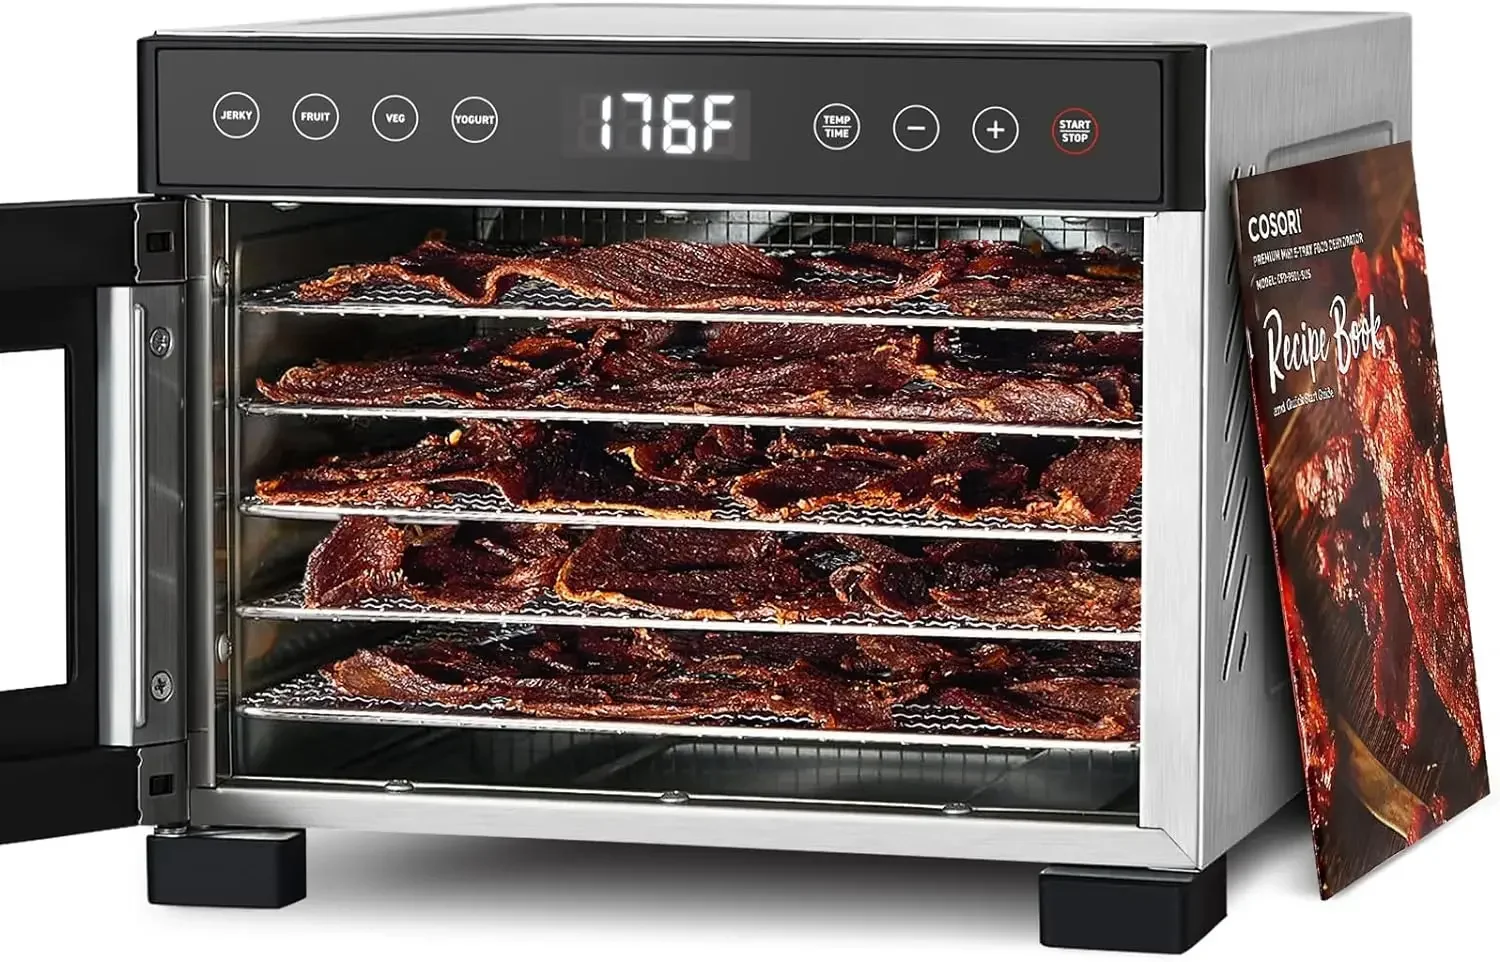 

Kitchenware -176F Oven -4 modes - Power saving, durable, can be used on time-66 discount